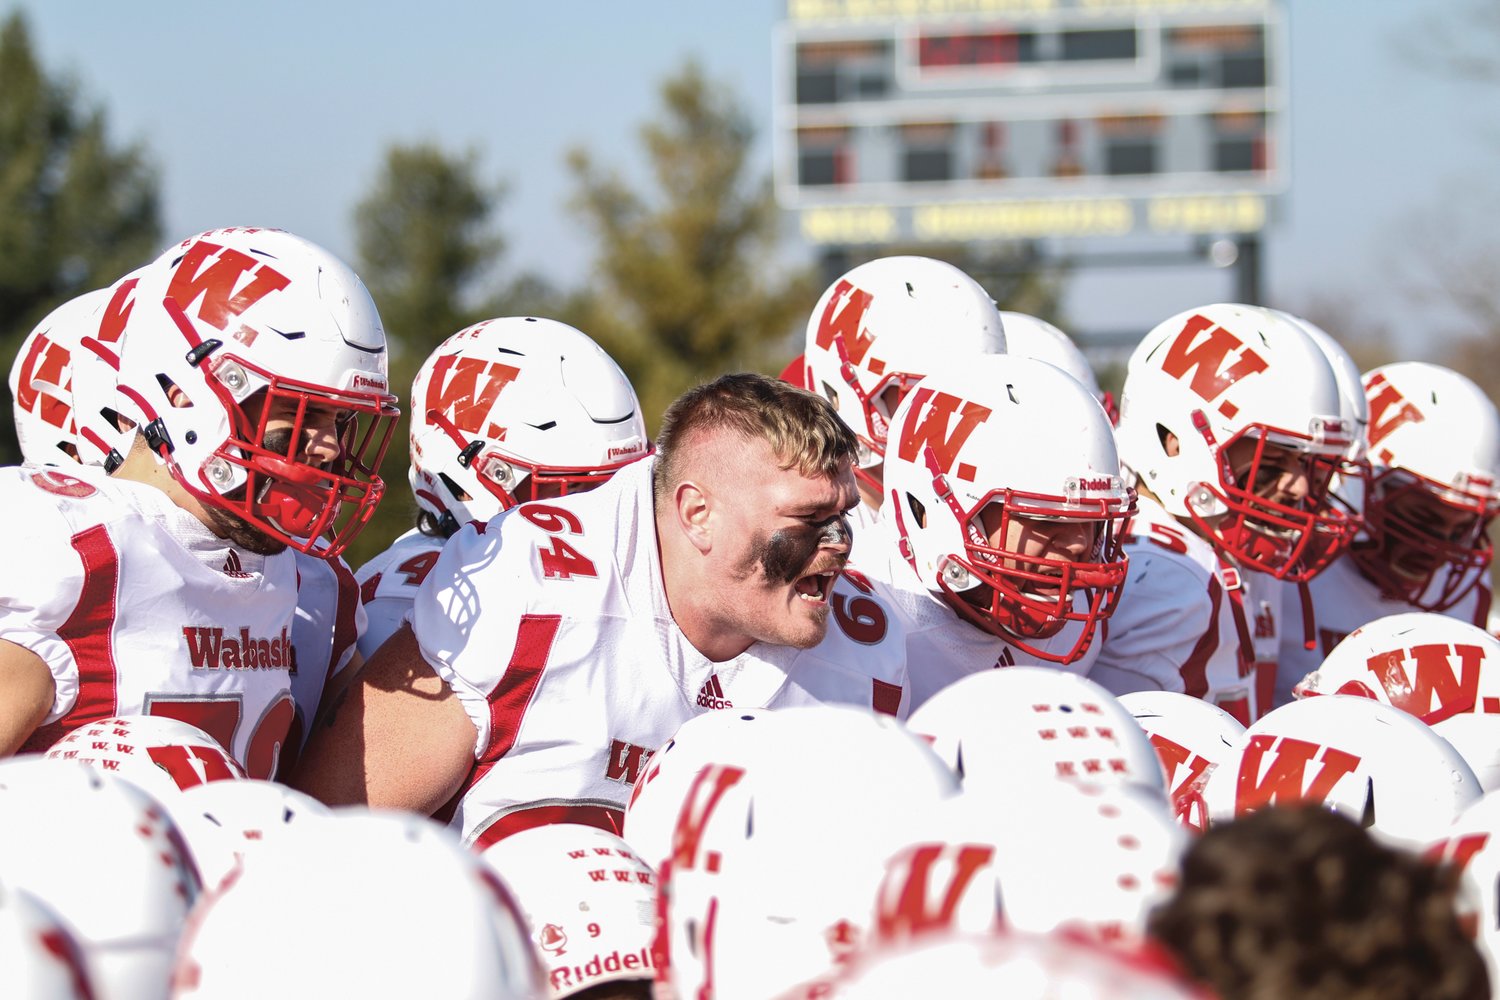 Wabash senior Jake Slager leads the seniors in a chant during the 126th Monon Bell Classic.